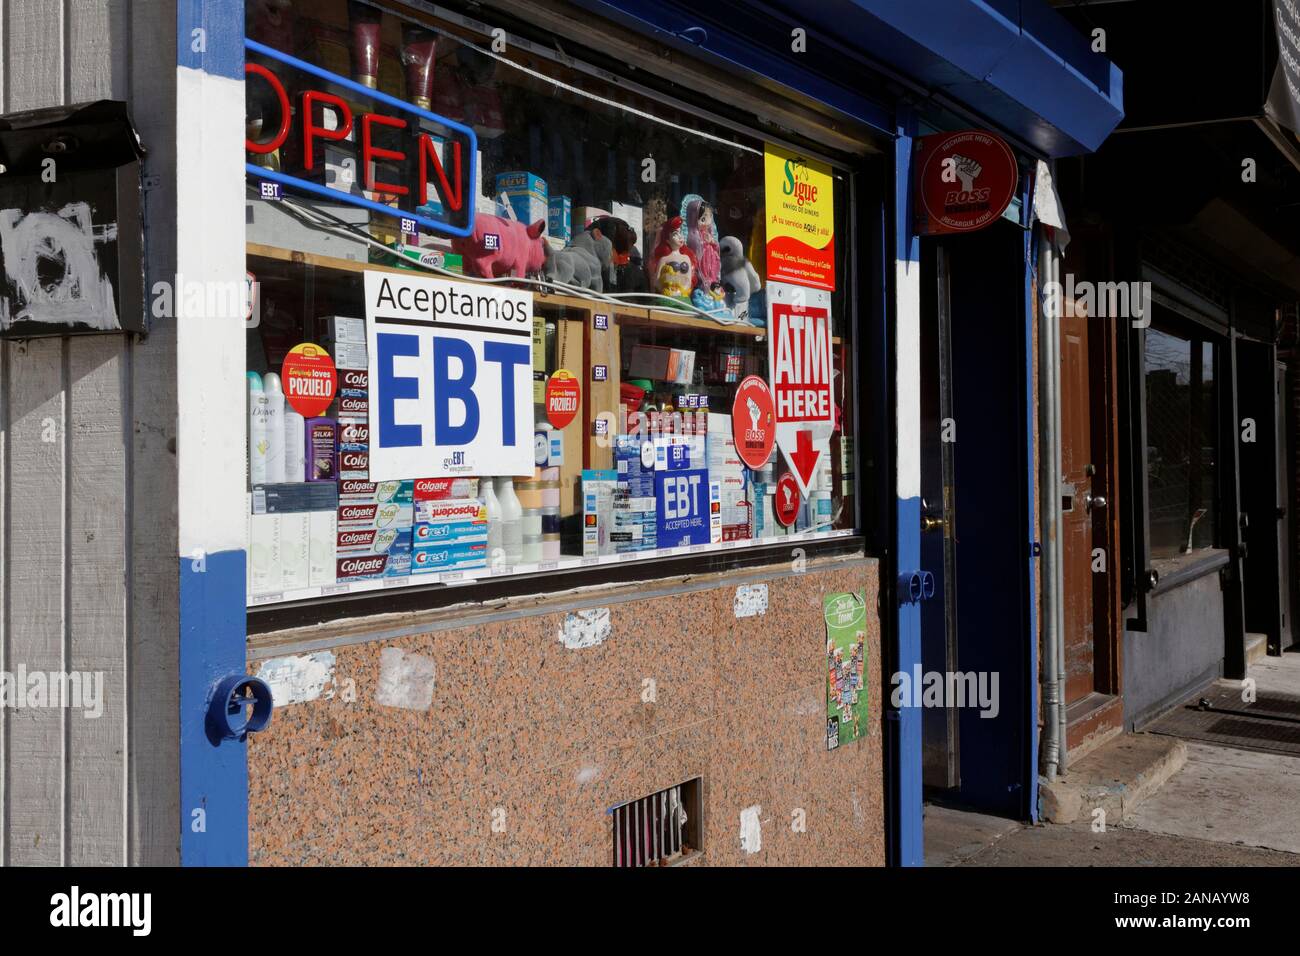 Philadelphia, PA, USA - January 15, 2020: A small independent convenience store advertises that EBT cards, also known as food stamps, are accepted. Stock Photo